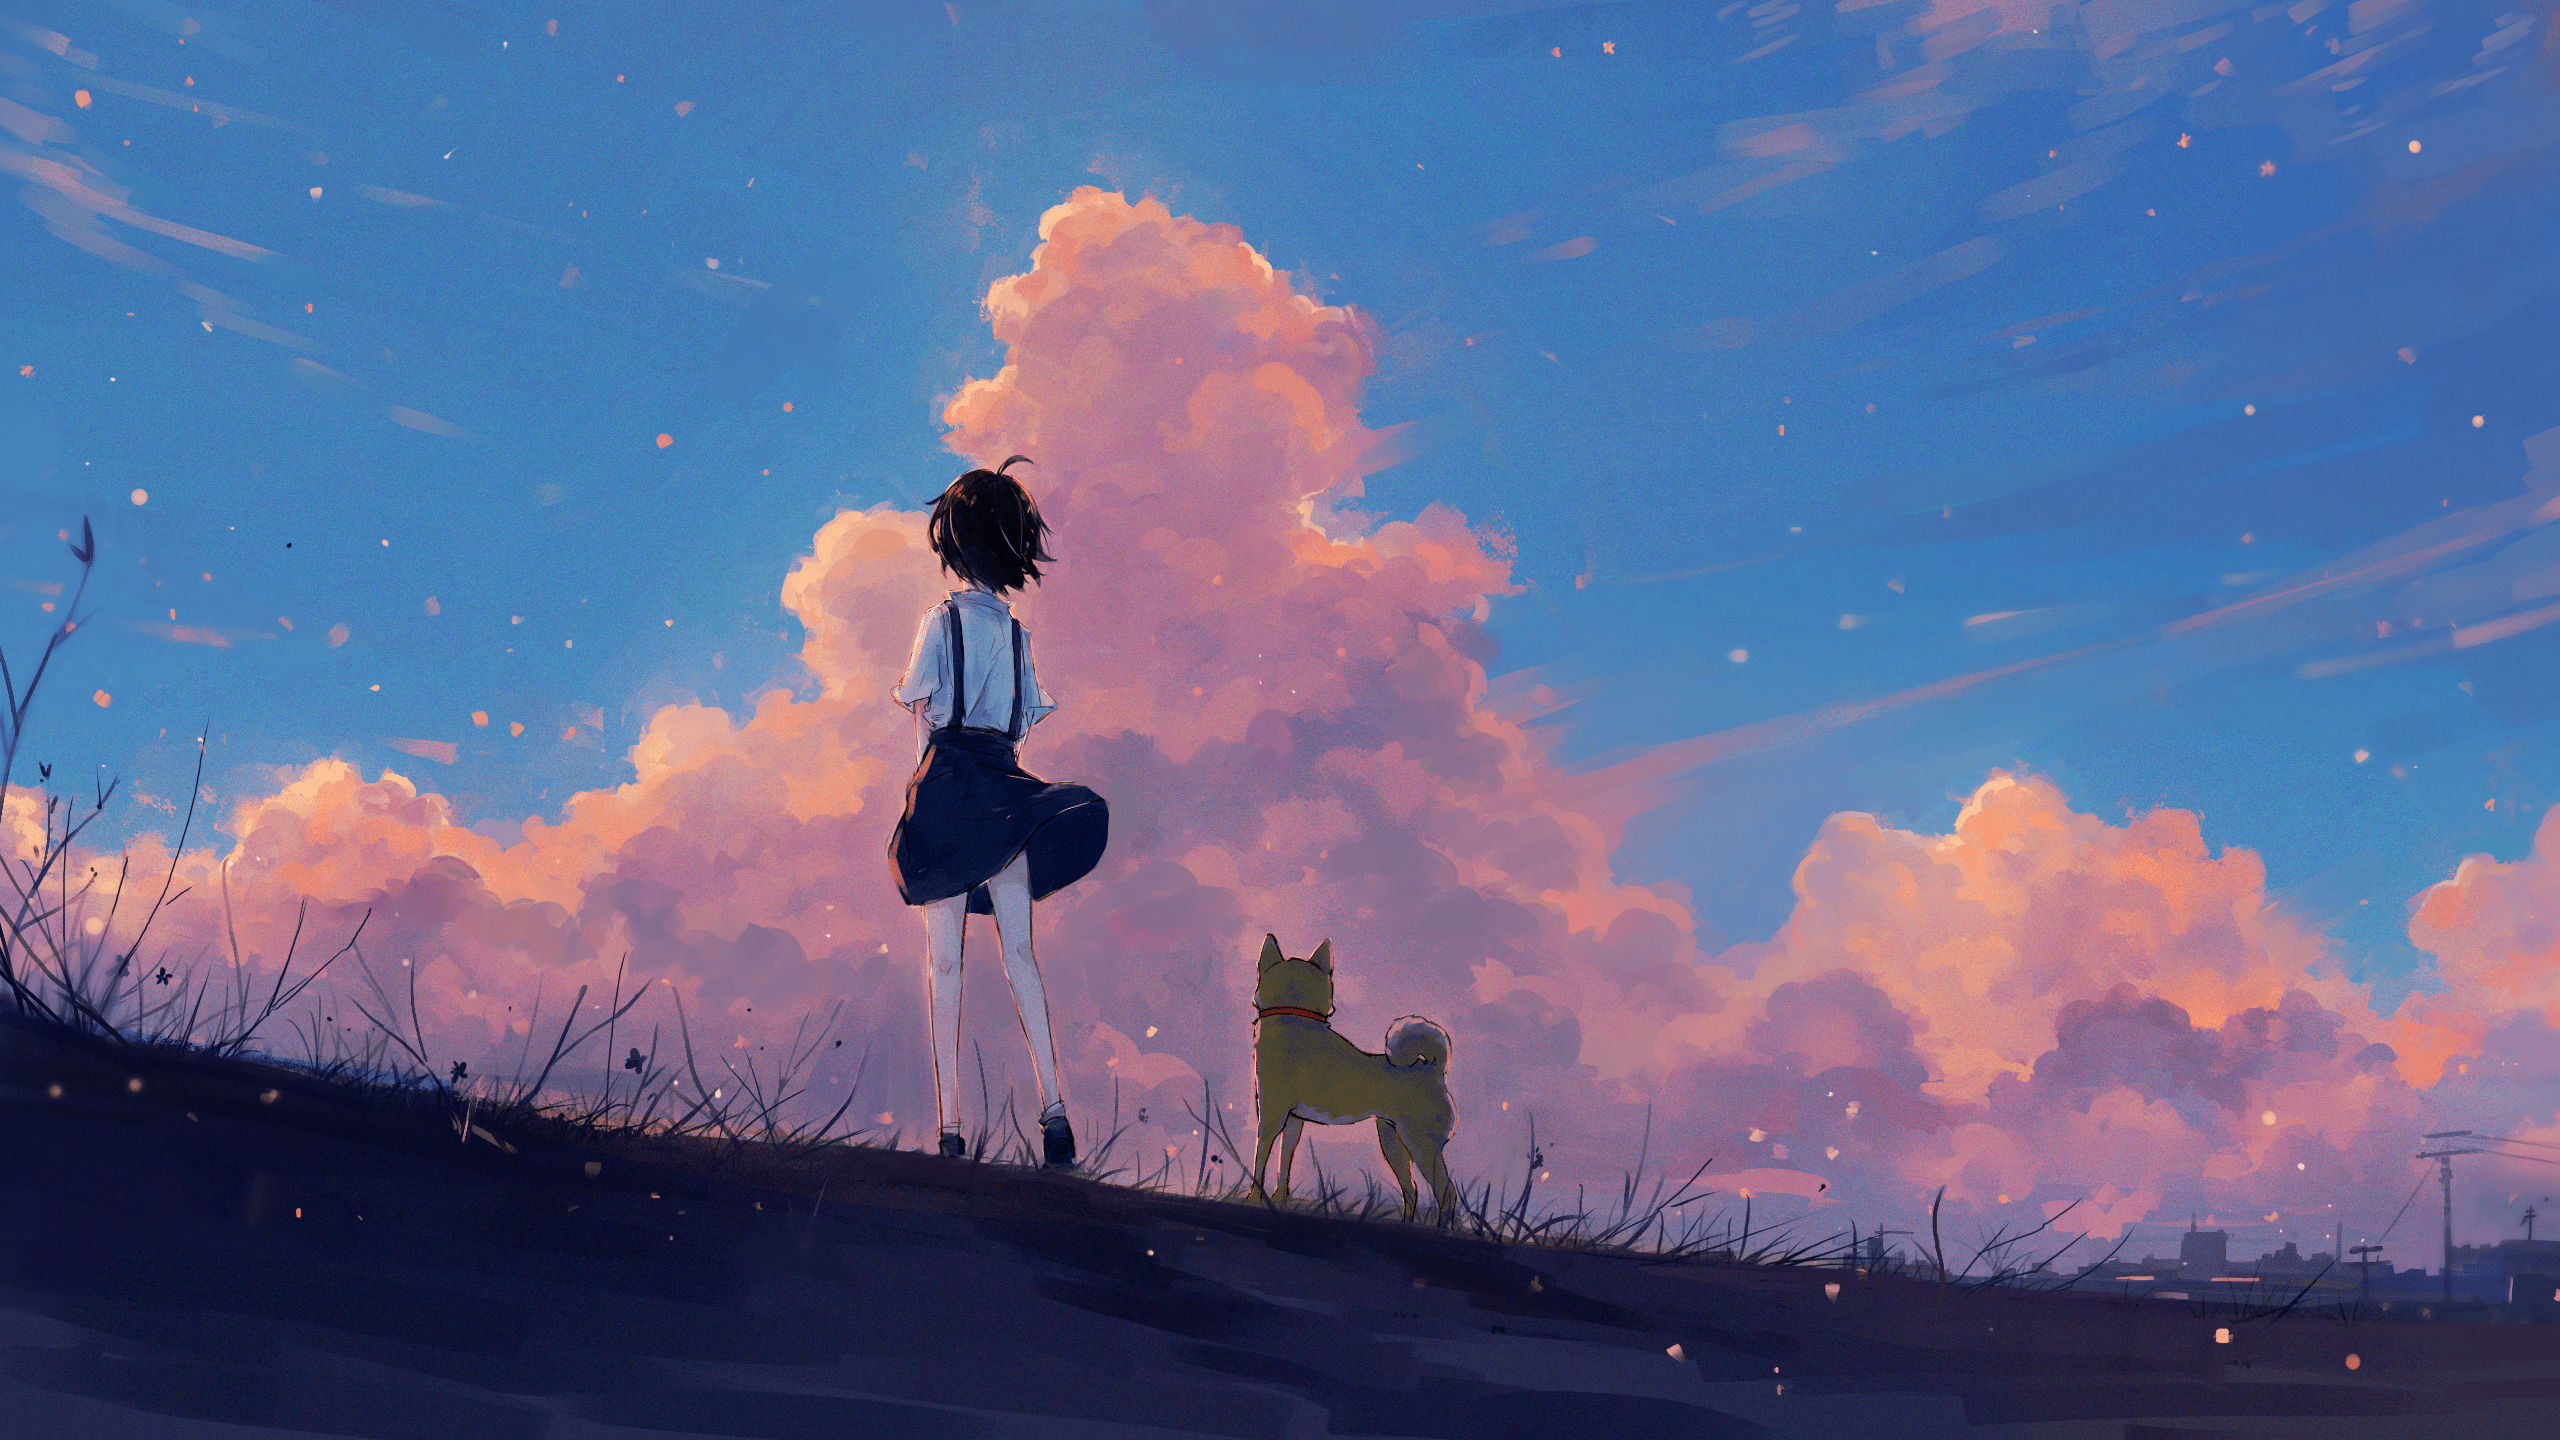 A woman and her dog standing on a hill with a beautiful sky - 2560x1440, anime landscape